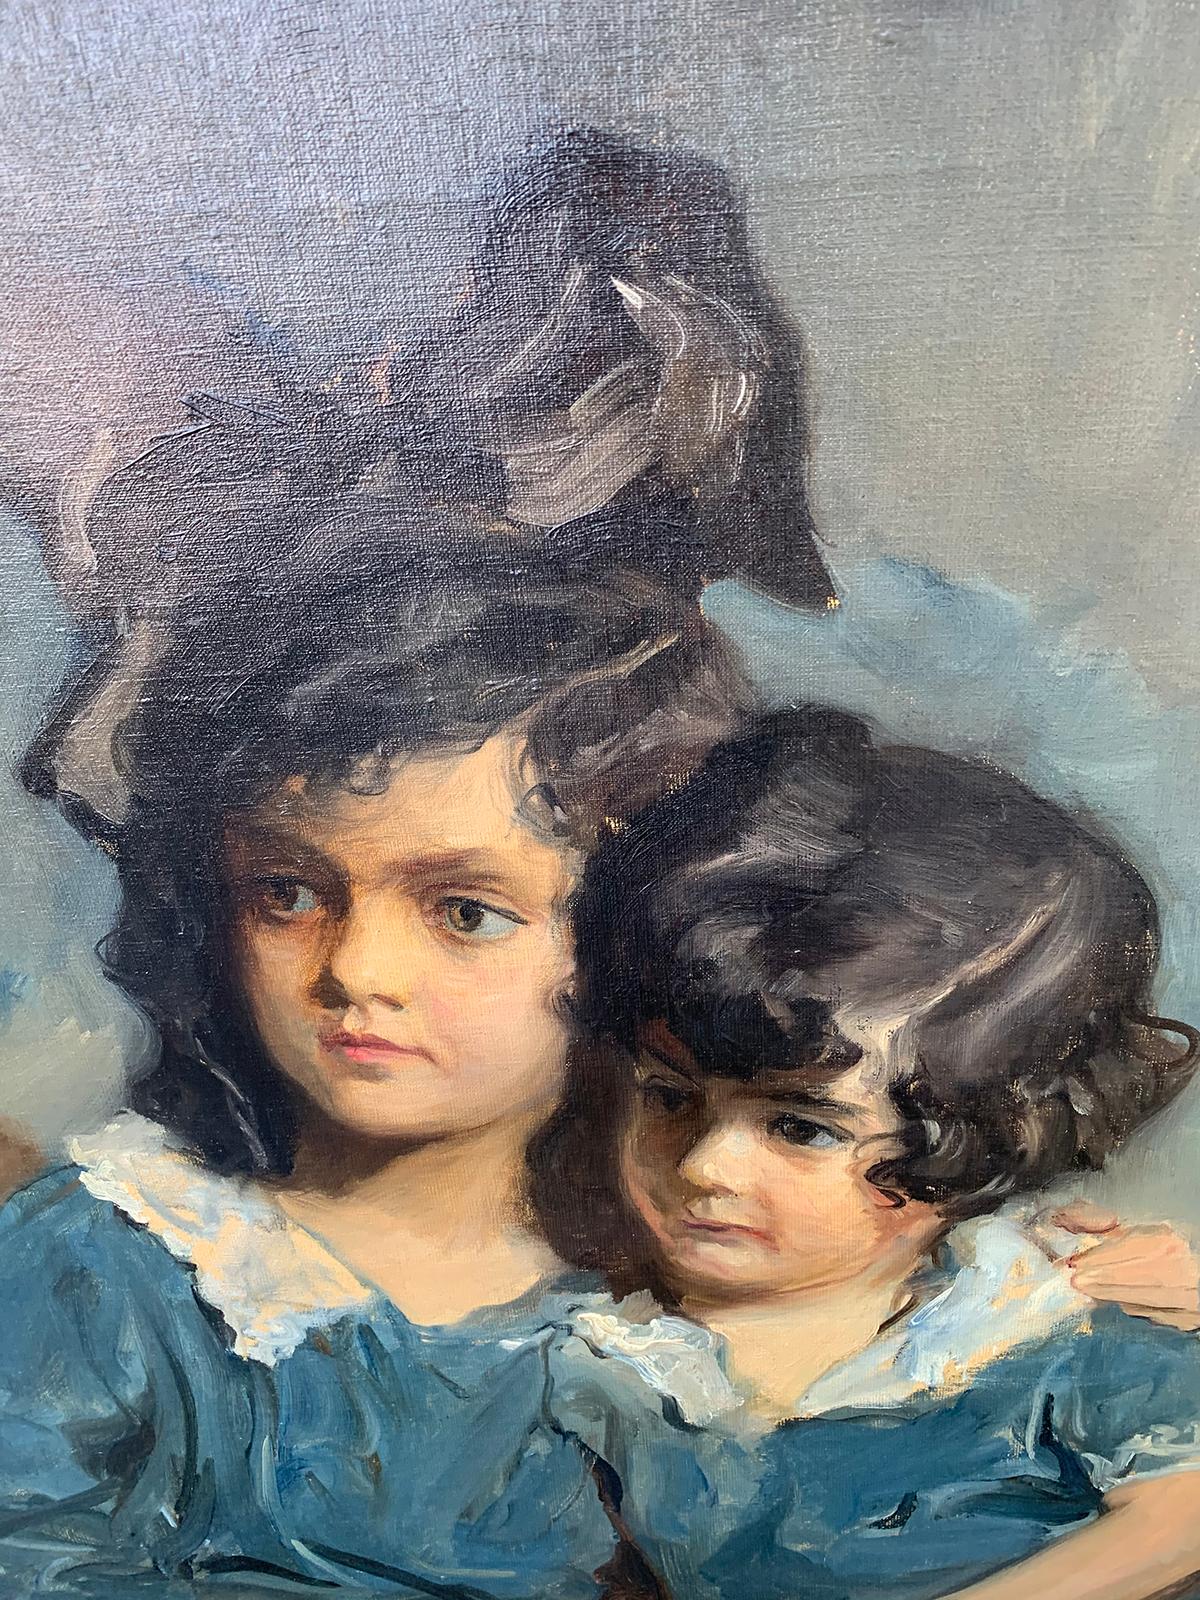 20th Century American Oil Painting of Sisters by John Quincy Adams, Signed & Dated, C.1923 